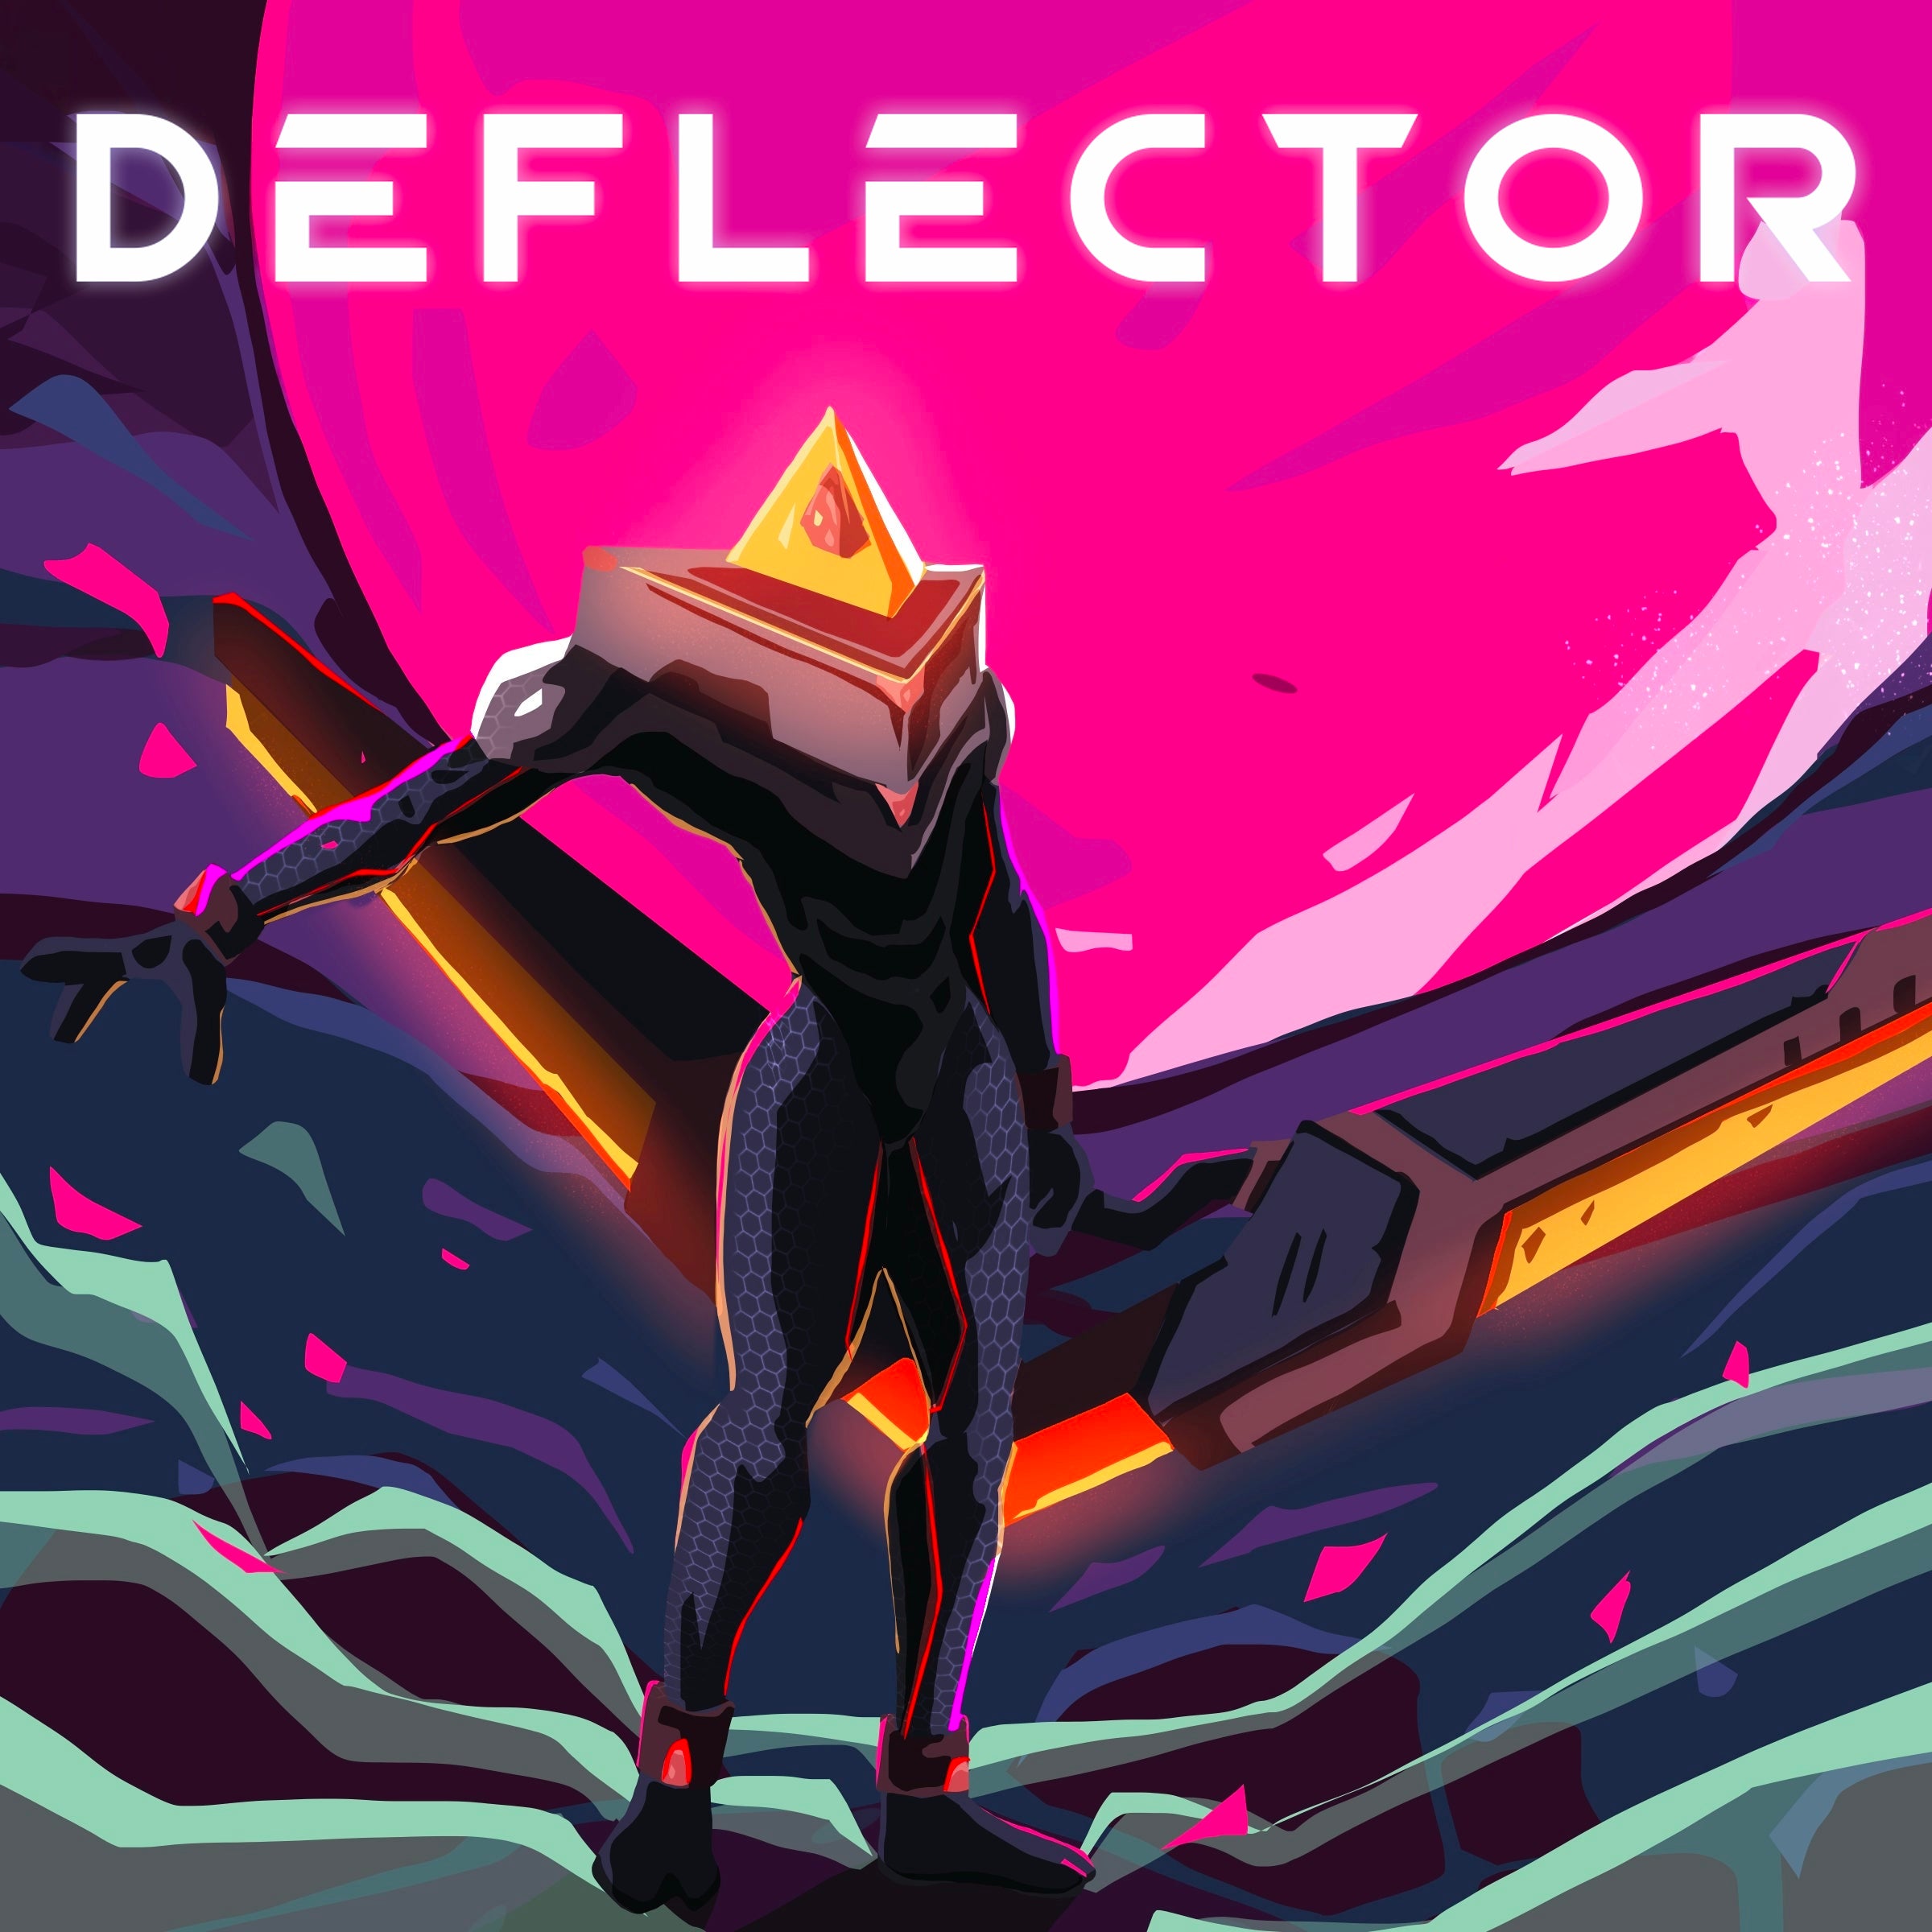 download the new Deflector